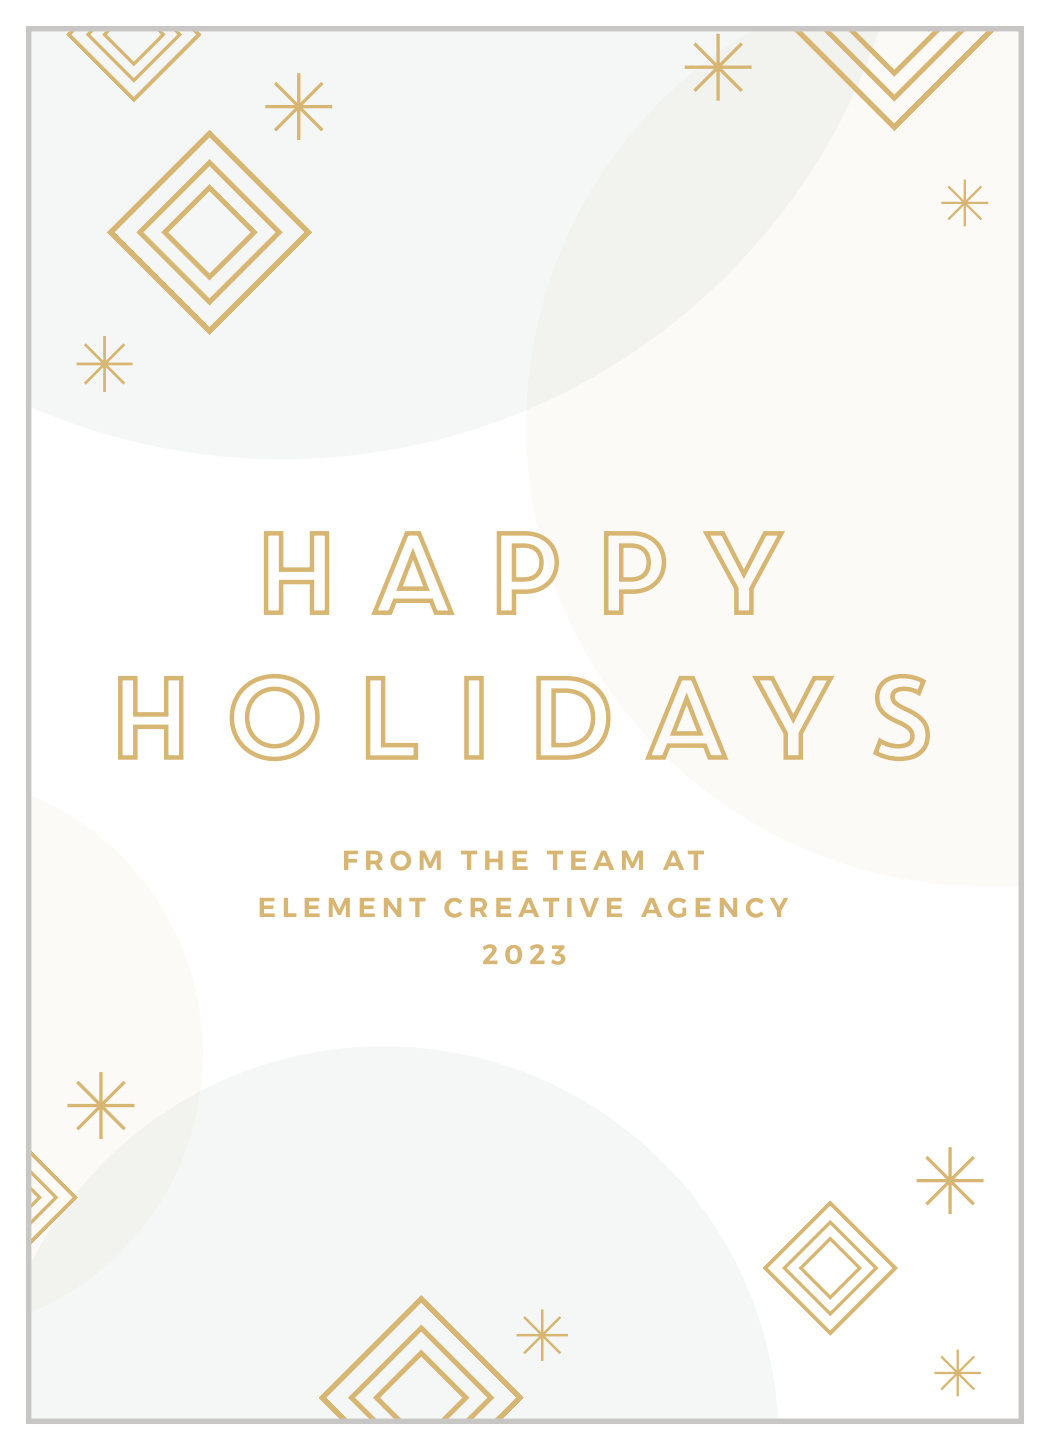 Modern Christmas Corporate Holiday Cards